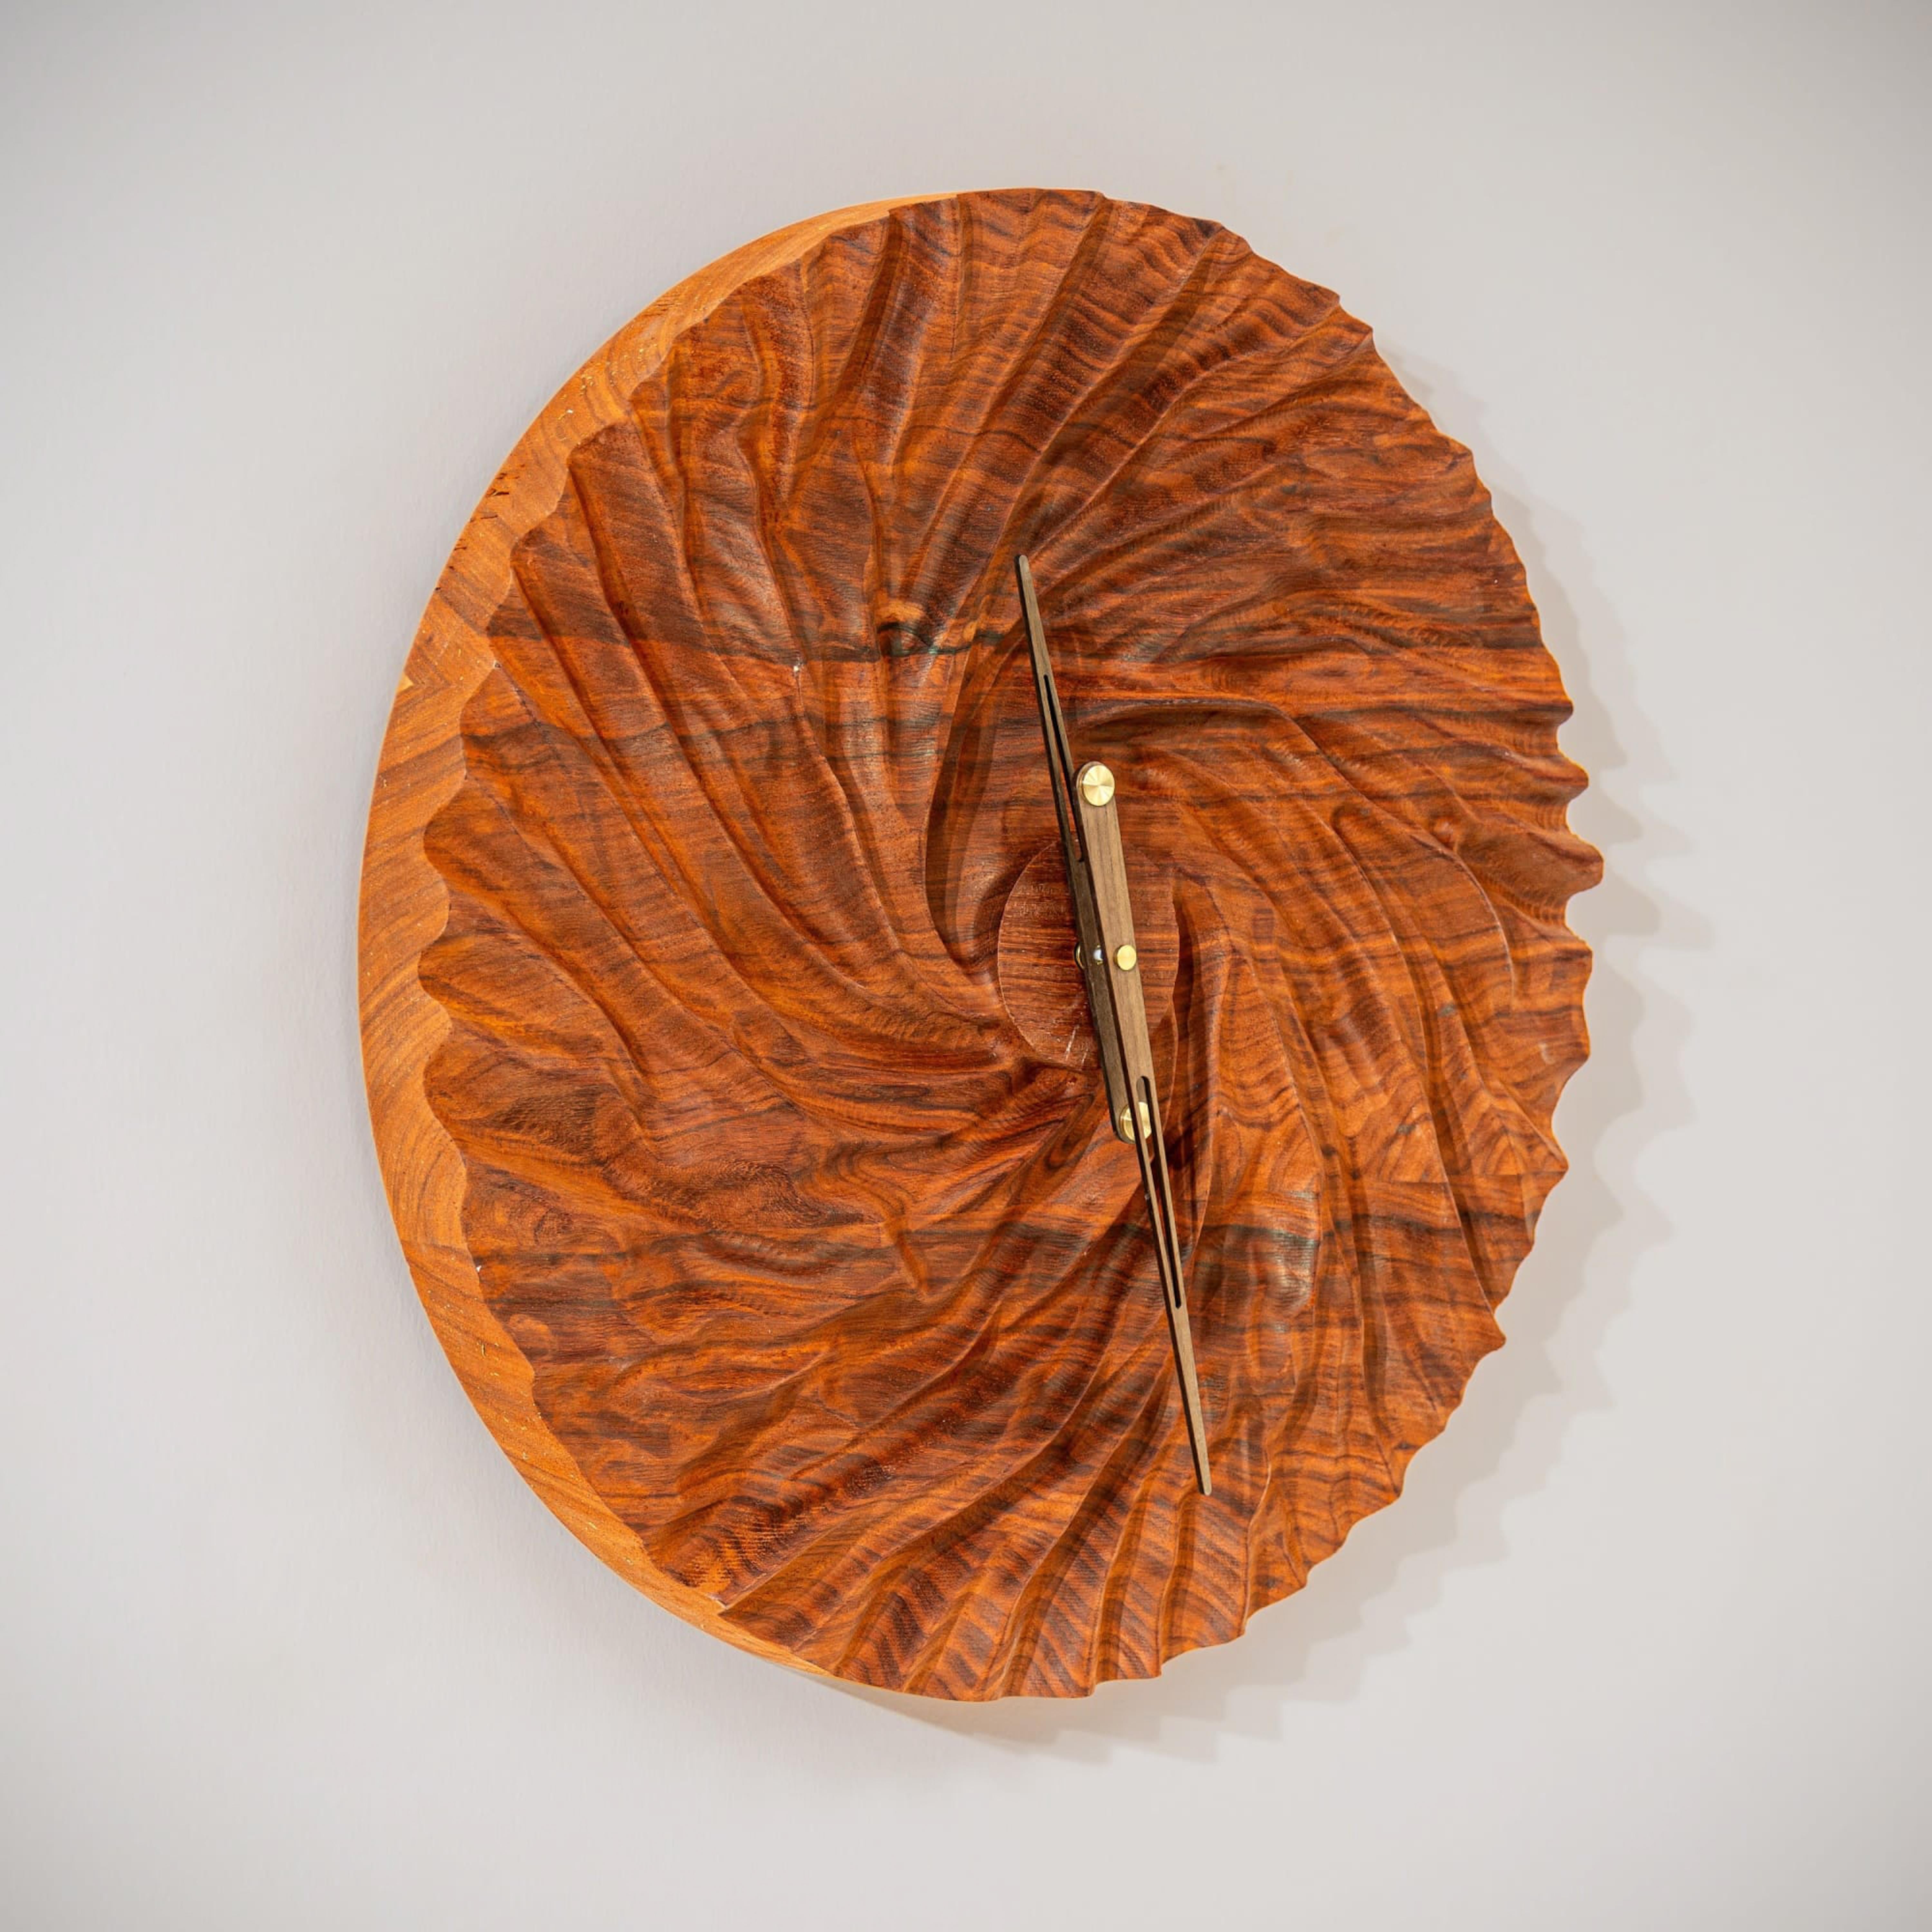 Hand-Carved Tulip Design Wooden Wall Clock For Sale